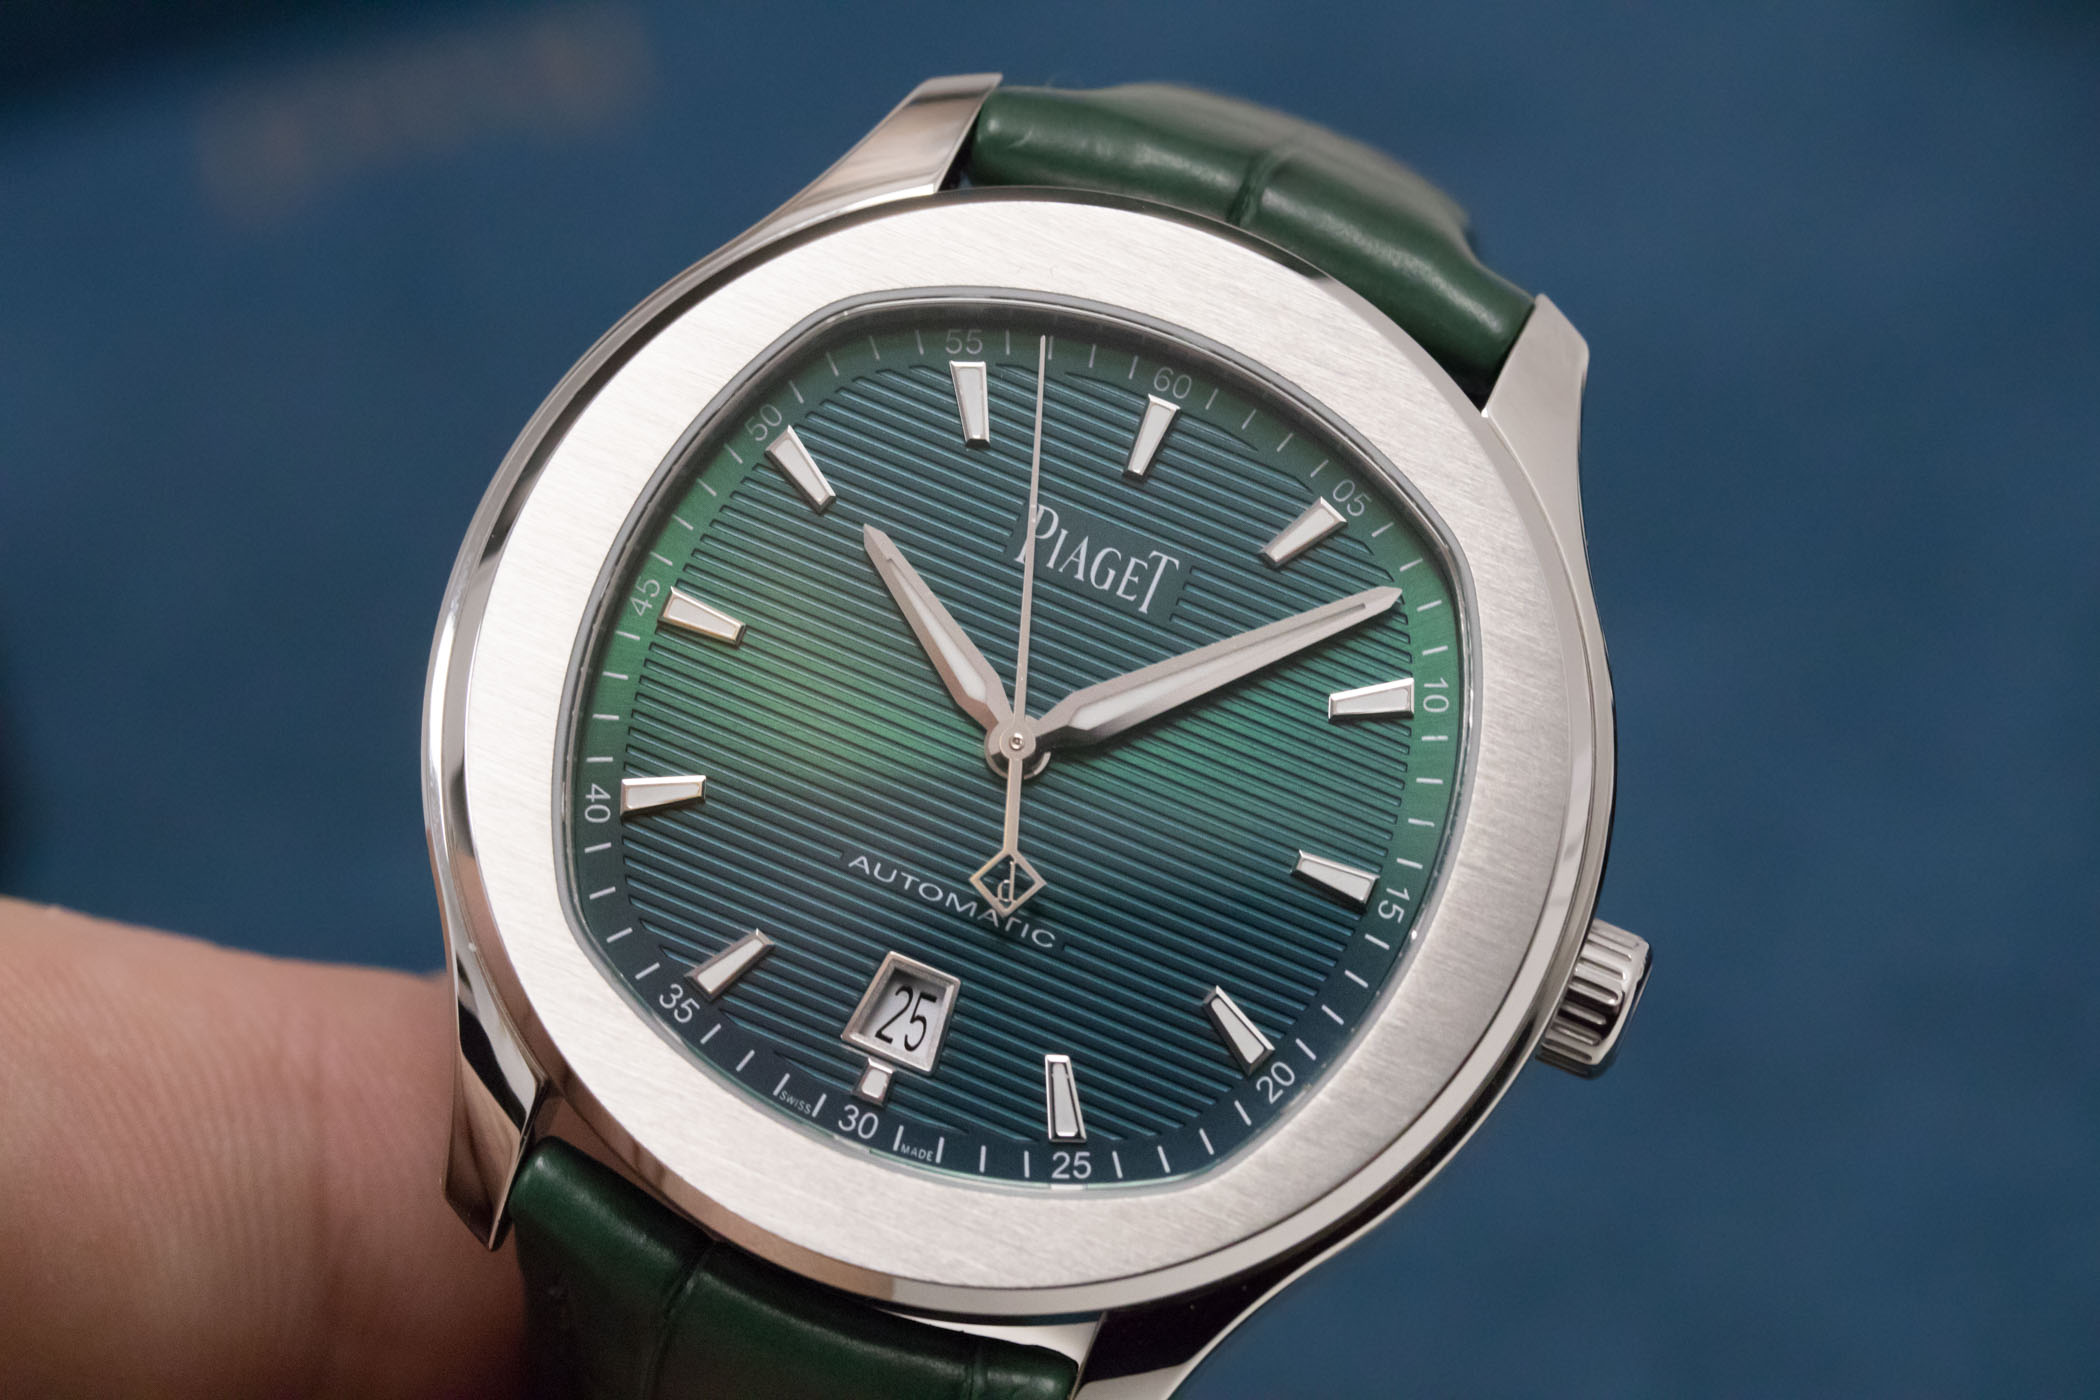 Piaget Polo S Green Dial - SIHH 2019 review - 8